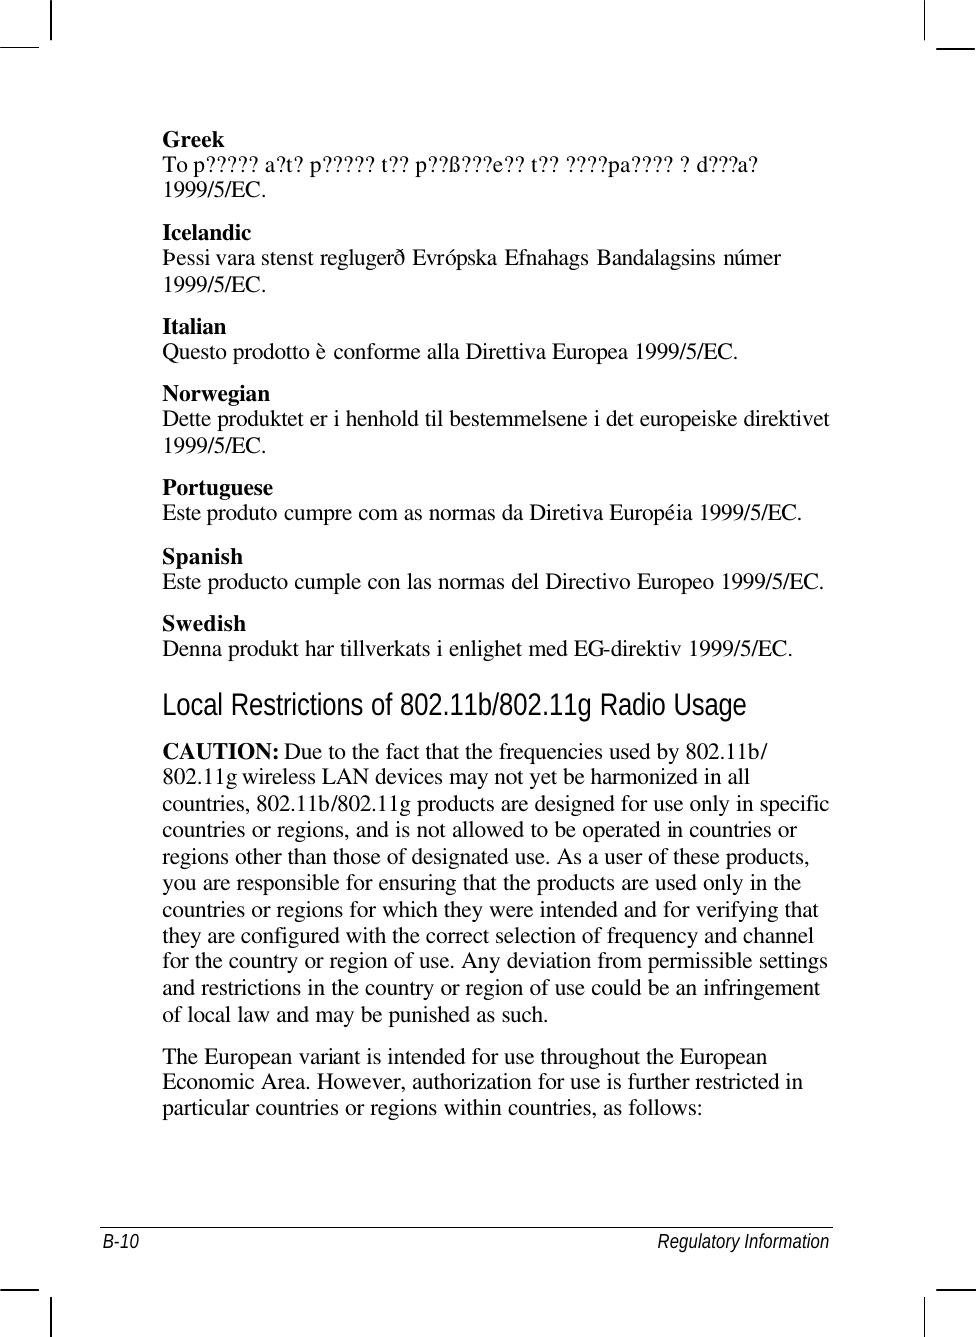  B-10 Regulatory Information Greek To p????? a?t? p????? t?? p??ß???e?? t?? ????pa???? ?d???a? 1999/5/EC. Icelandic Þessi vara stenst reglugerð Evrópska Efnahags Bandalagsins númer 1999/5/EC. Italian Questo prodotto è conforme alla Direttiva Europea 1999/5/EC. Norwegian Dette produktet er i henhold til bestemmelsene i det europeiske direktivet 1999/5/EC. Portuguese Este produto cumpre com as normas da Diretiva Européia 1999/5/EC. Spanish Este producto cumple con las normas del Directivo Europeo 1999/5/EC. Swedish Denna produkt har tillverkats i enlighet med EG-direktiv 1999/5/EC. Local Restrictions of 802.11b/802.11g Radio Usage CAUTION: Due to the fact that the frequencies used by 802.11b/ 802.11g wireless LAN devices may not yet be harmonized in all countries, 802.11b/802.11g products are designed for use only in specific countries or regions, and is not allowed to be operated in countries or regions other than those of designated use. As a user of these products, you are responsible for ensuring that the products are used only in the countries or regions for which they were intended and for verifying that they are configured with the correct selection of frequency and channel for the country or region of use. Any deviation from permissible settings and restrictions in the country or region of use could be an infringement of local law and may be punished as such. The European variant is intended for use throughout the European Economic Area. However, authorization for use is further restricted in particular countries or regions within countries, as follows: 